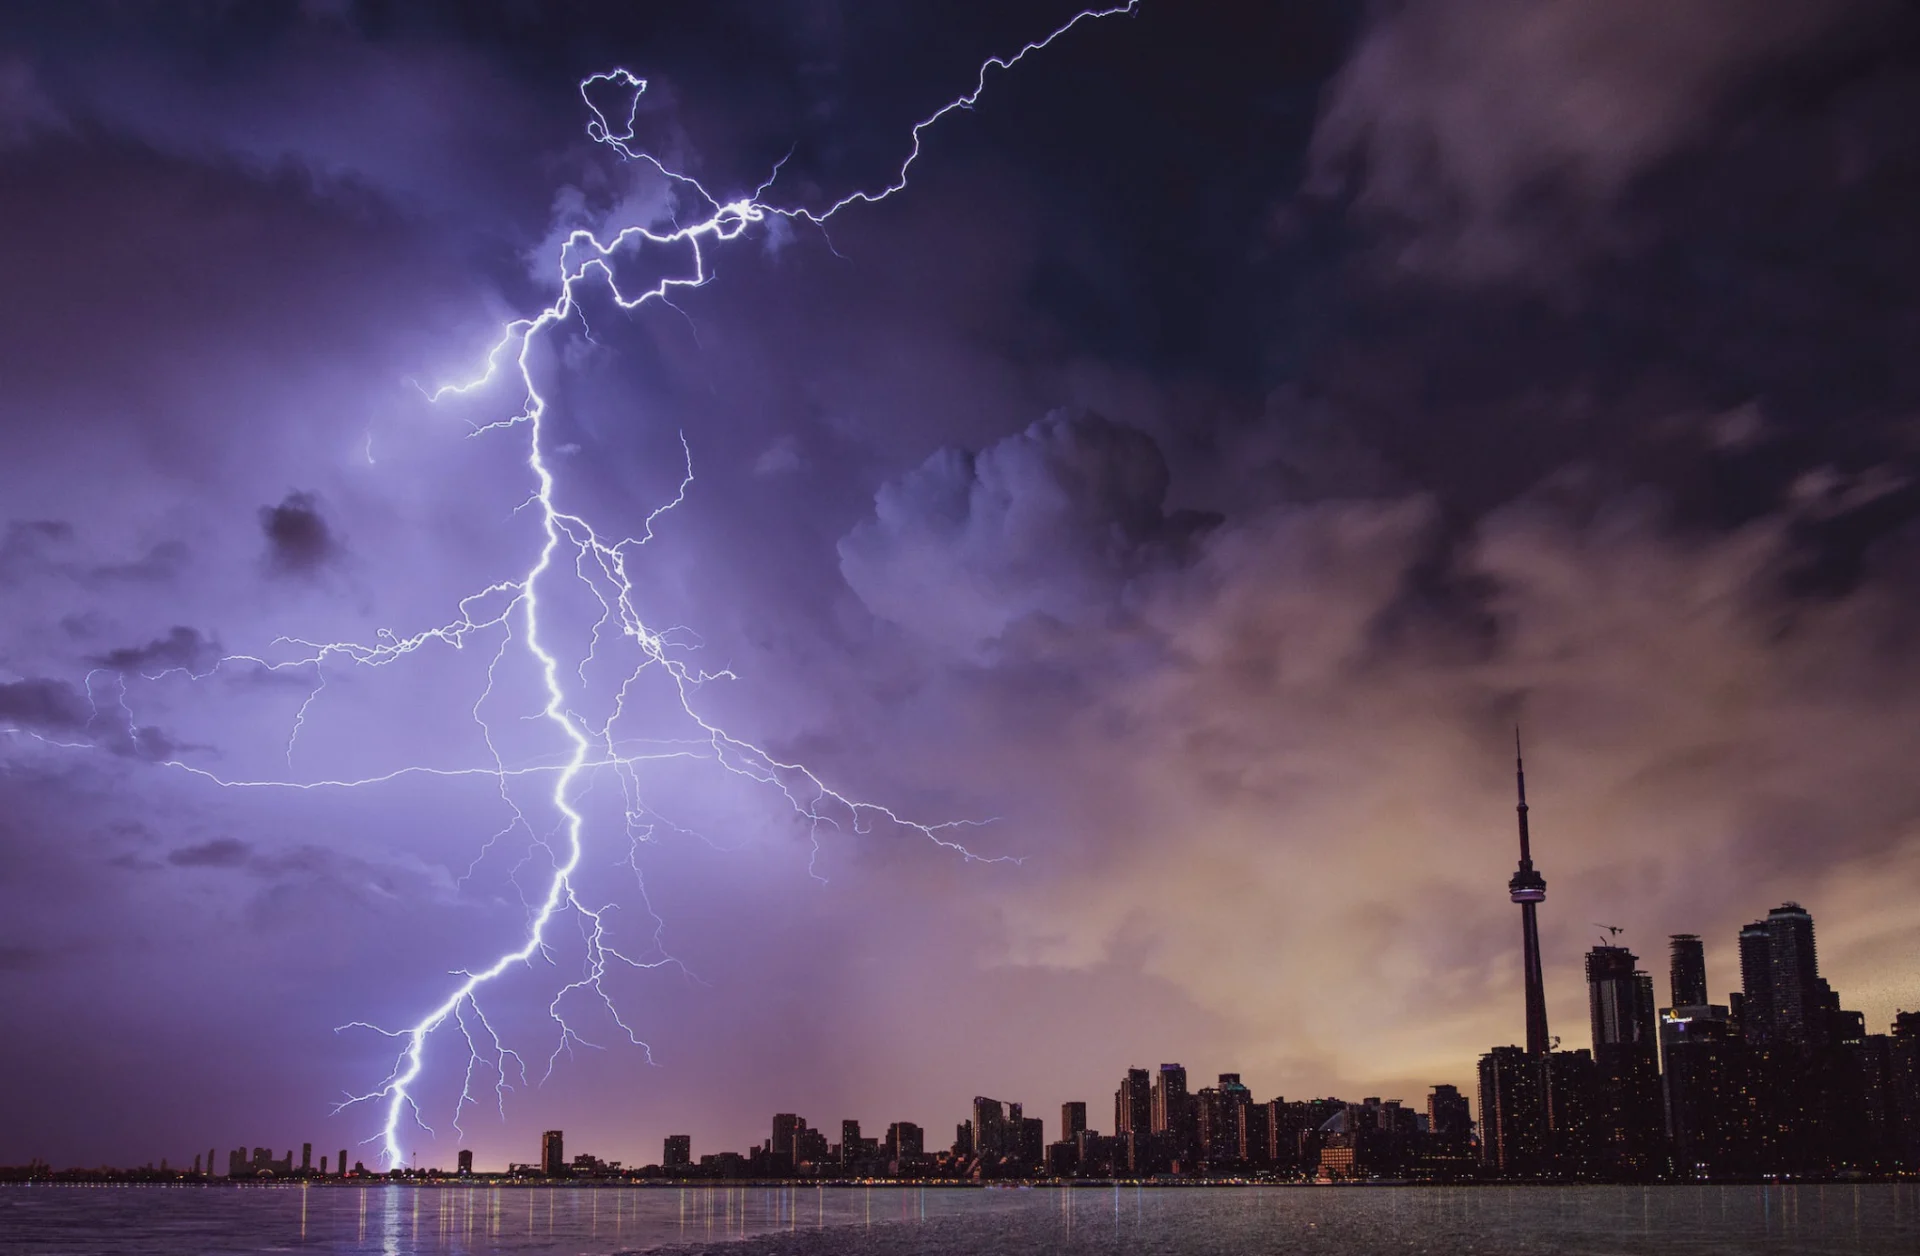 Lightning is a deadly threat. But what really happens inside someone when they’re struck by lightning?